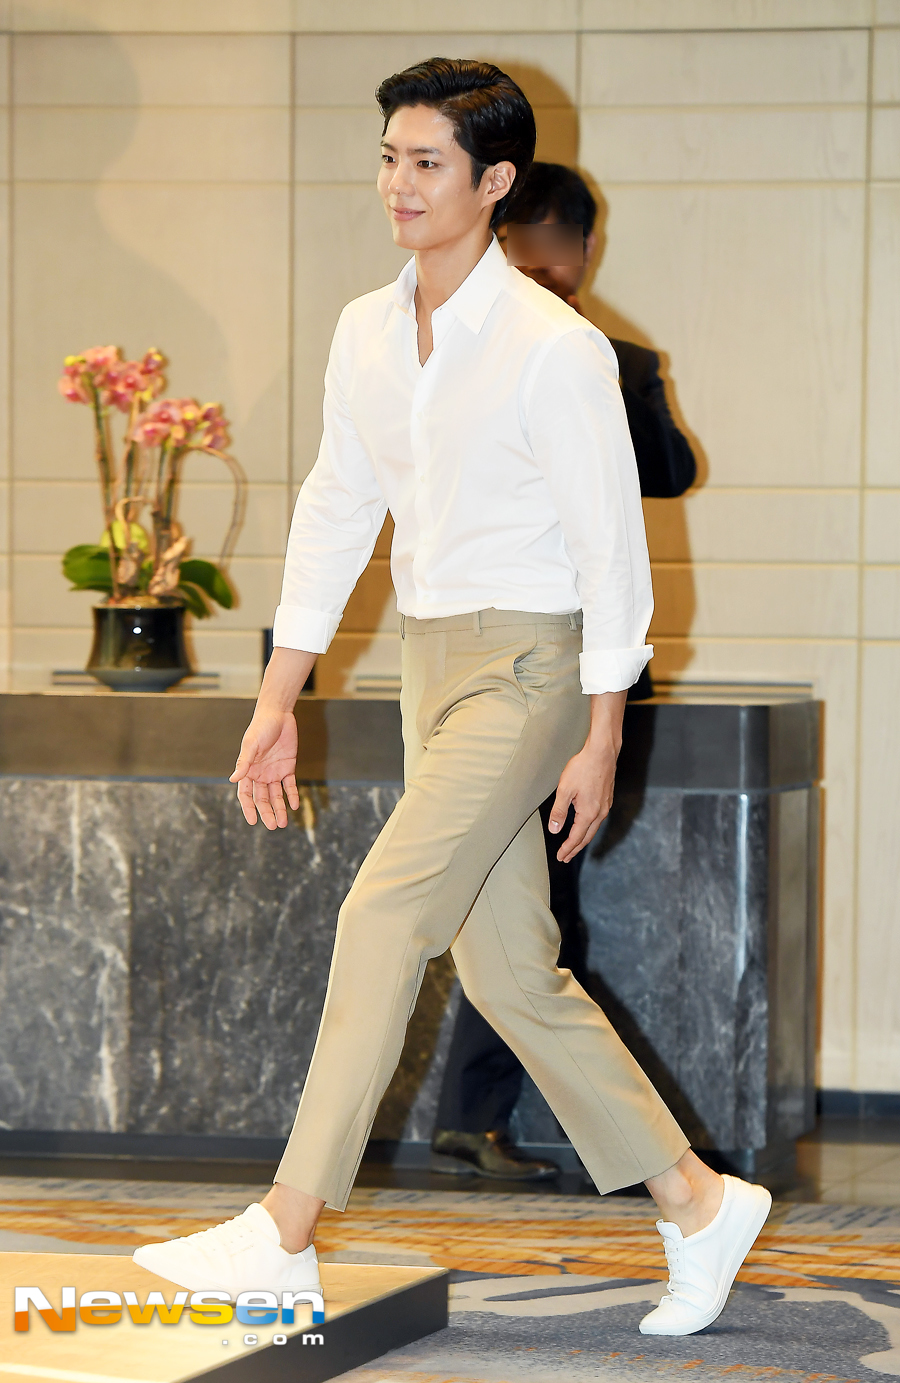 Actor Park Bo-gum attended the Winix tumble dryer launch event held at the Grand Ballroom of the Gwanghwamun Four Seasons Hotel in Seoul on the morning of September 11.Park Bo-gum is entering the day.On the other hand, Park Bo-gum will cooperate with Song Hye-kyo in the TVN new drama Boyfriend ahead of the broadcast in November.Jung Yoo-jin